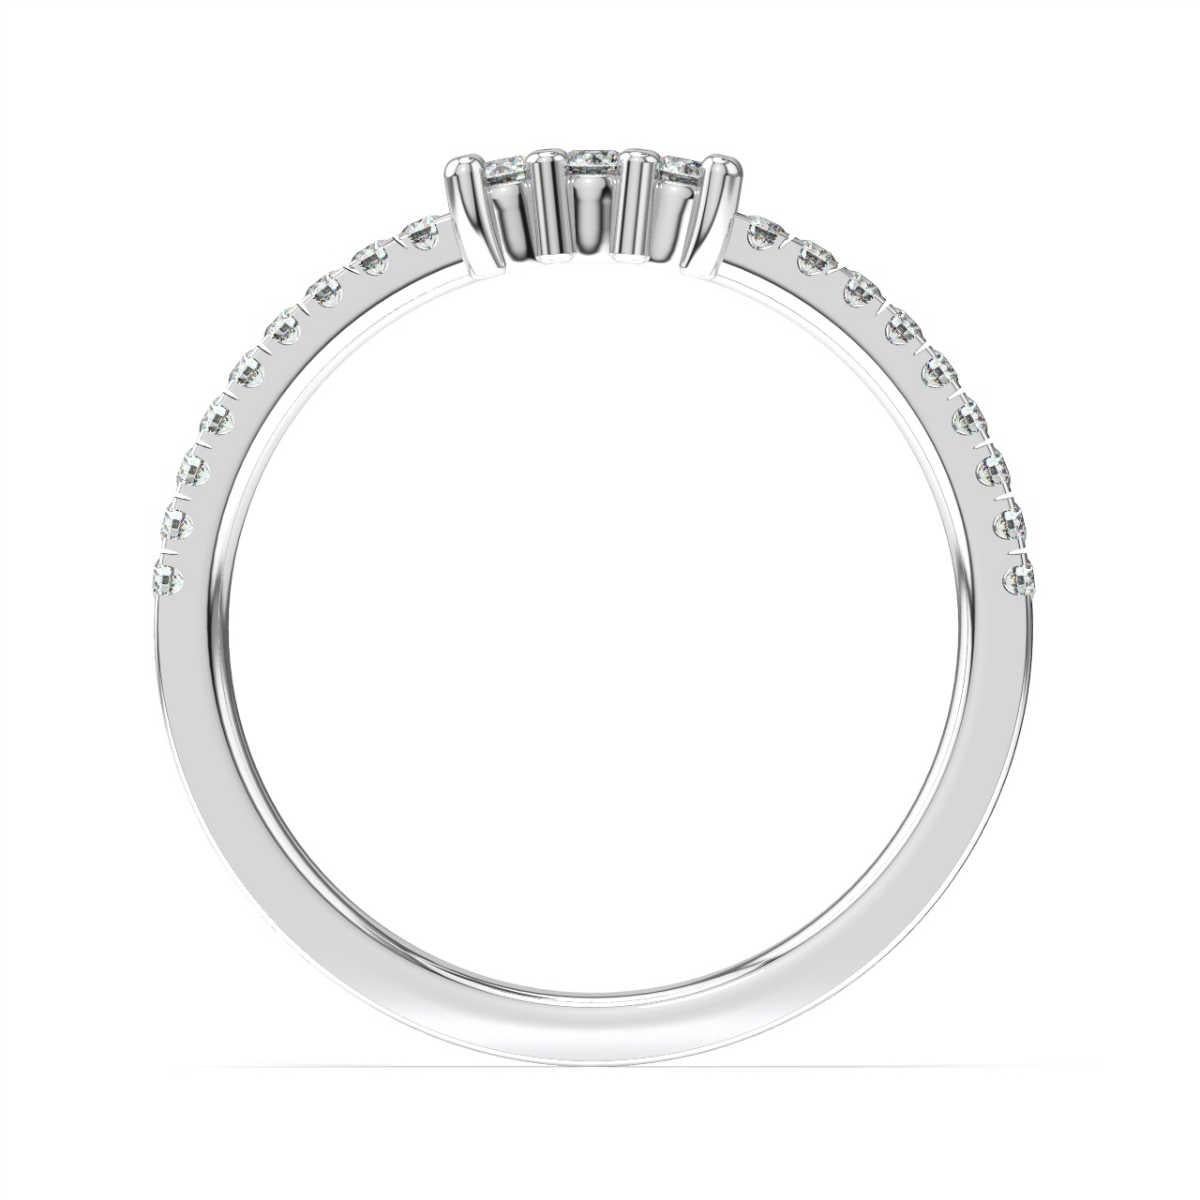 This petite band features three round diamonds prong set and a row of micro prongs set round brilliant diamonds from each side. Experience the difference!

Product details: 

Center Gemstone Color: WHITE
Side Gemstone Type: NATURAL DIAMOND
Side